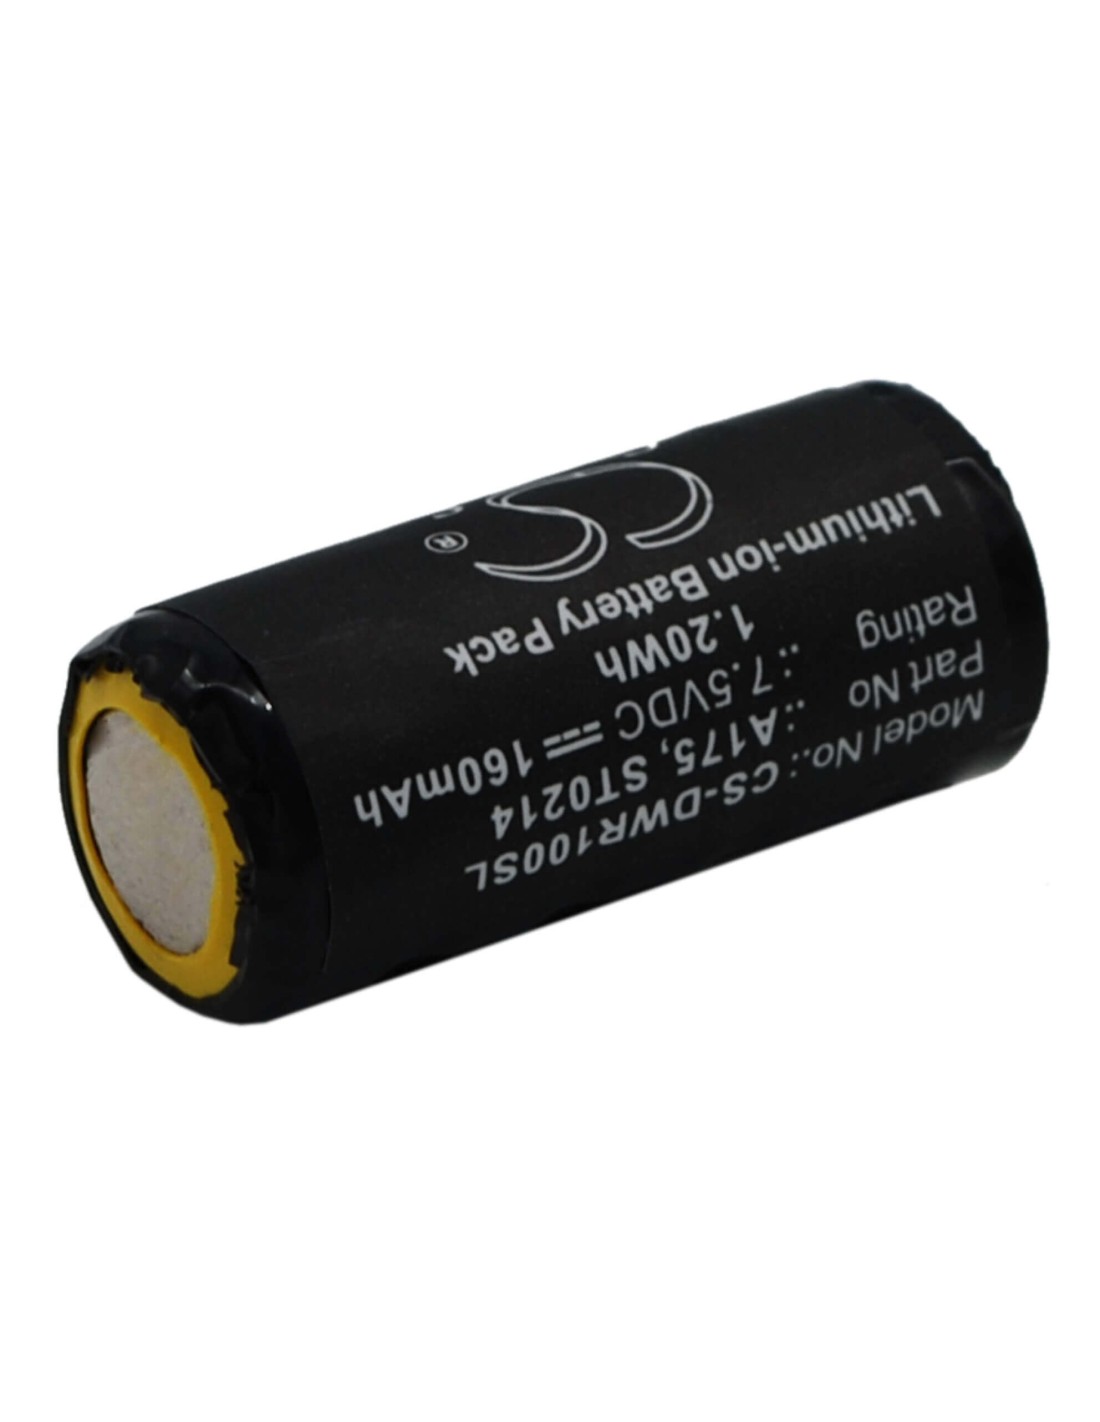 Battery for Dog Watch R-100, R-200 7.5V, 160mAh - 1.20Wh